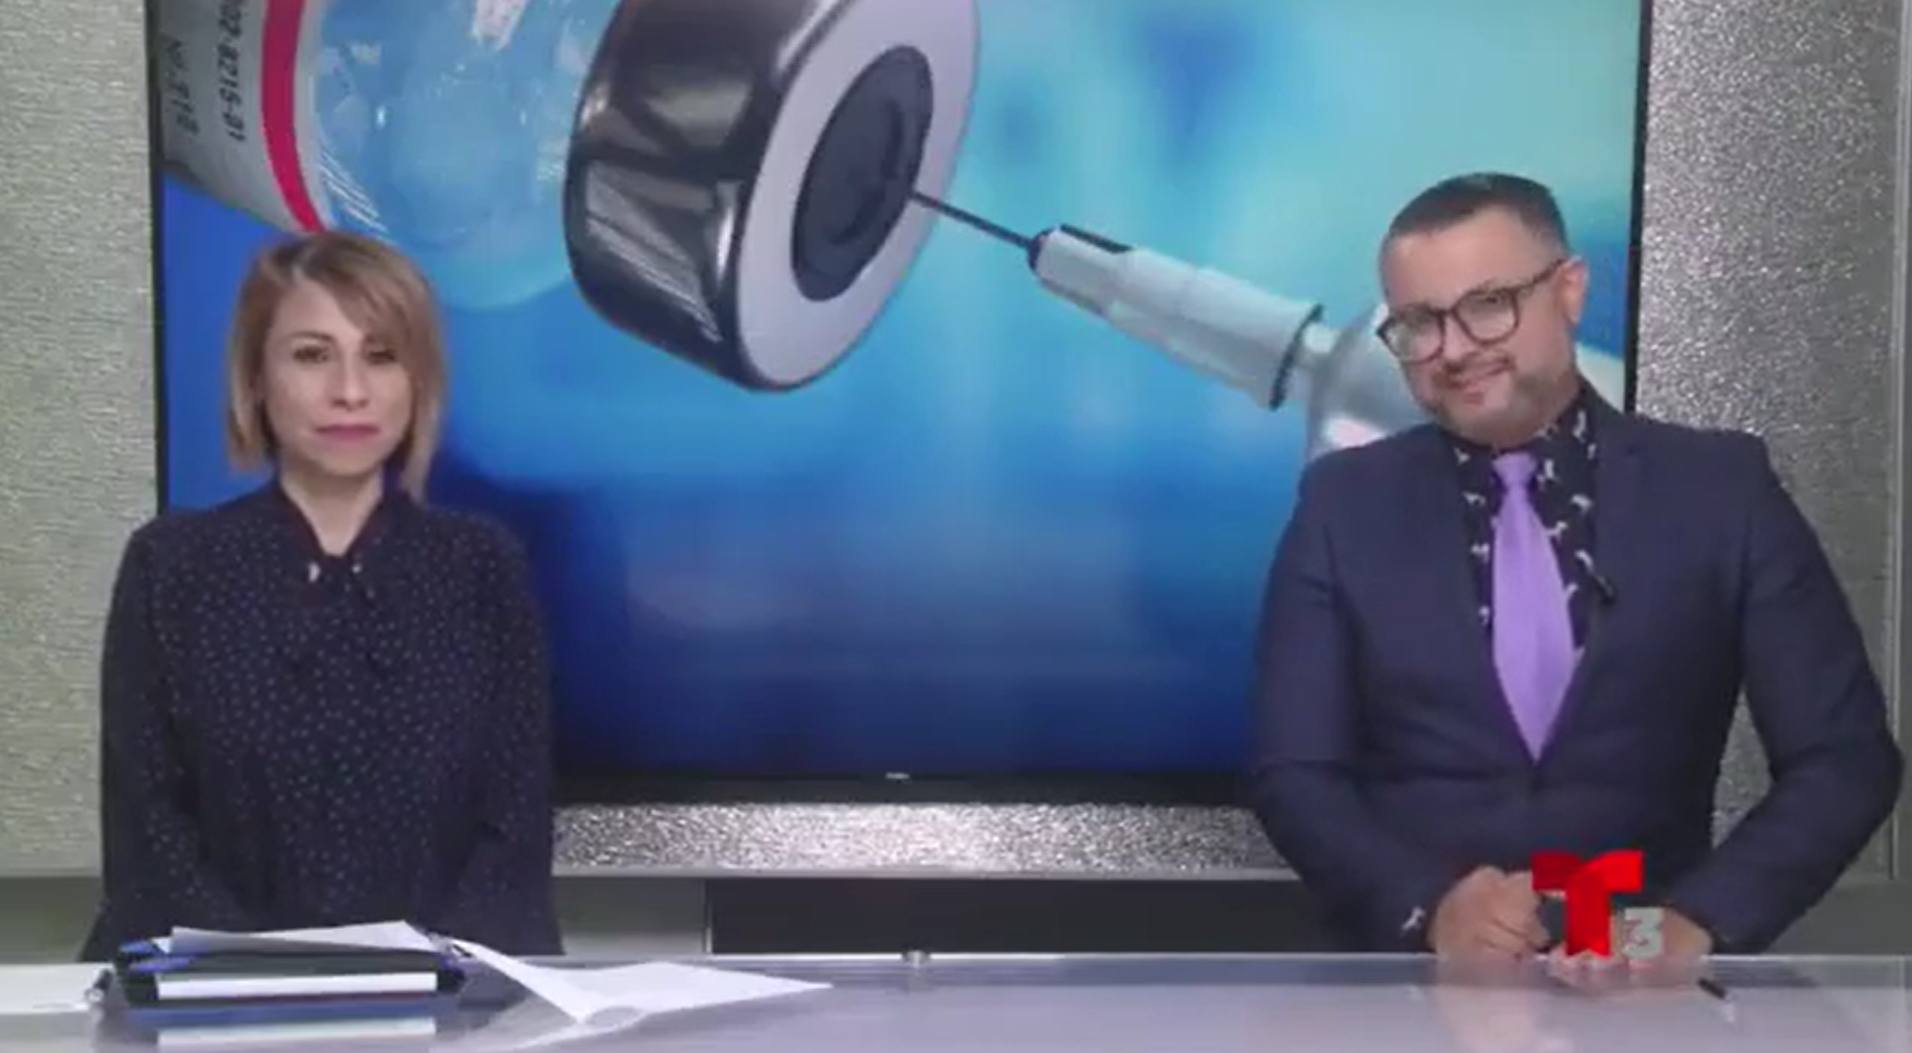 Two people sit down for a news interview in front of an image of a vaccination.